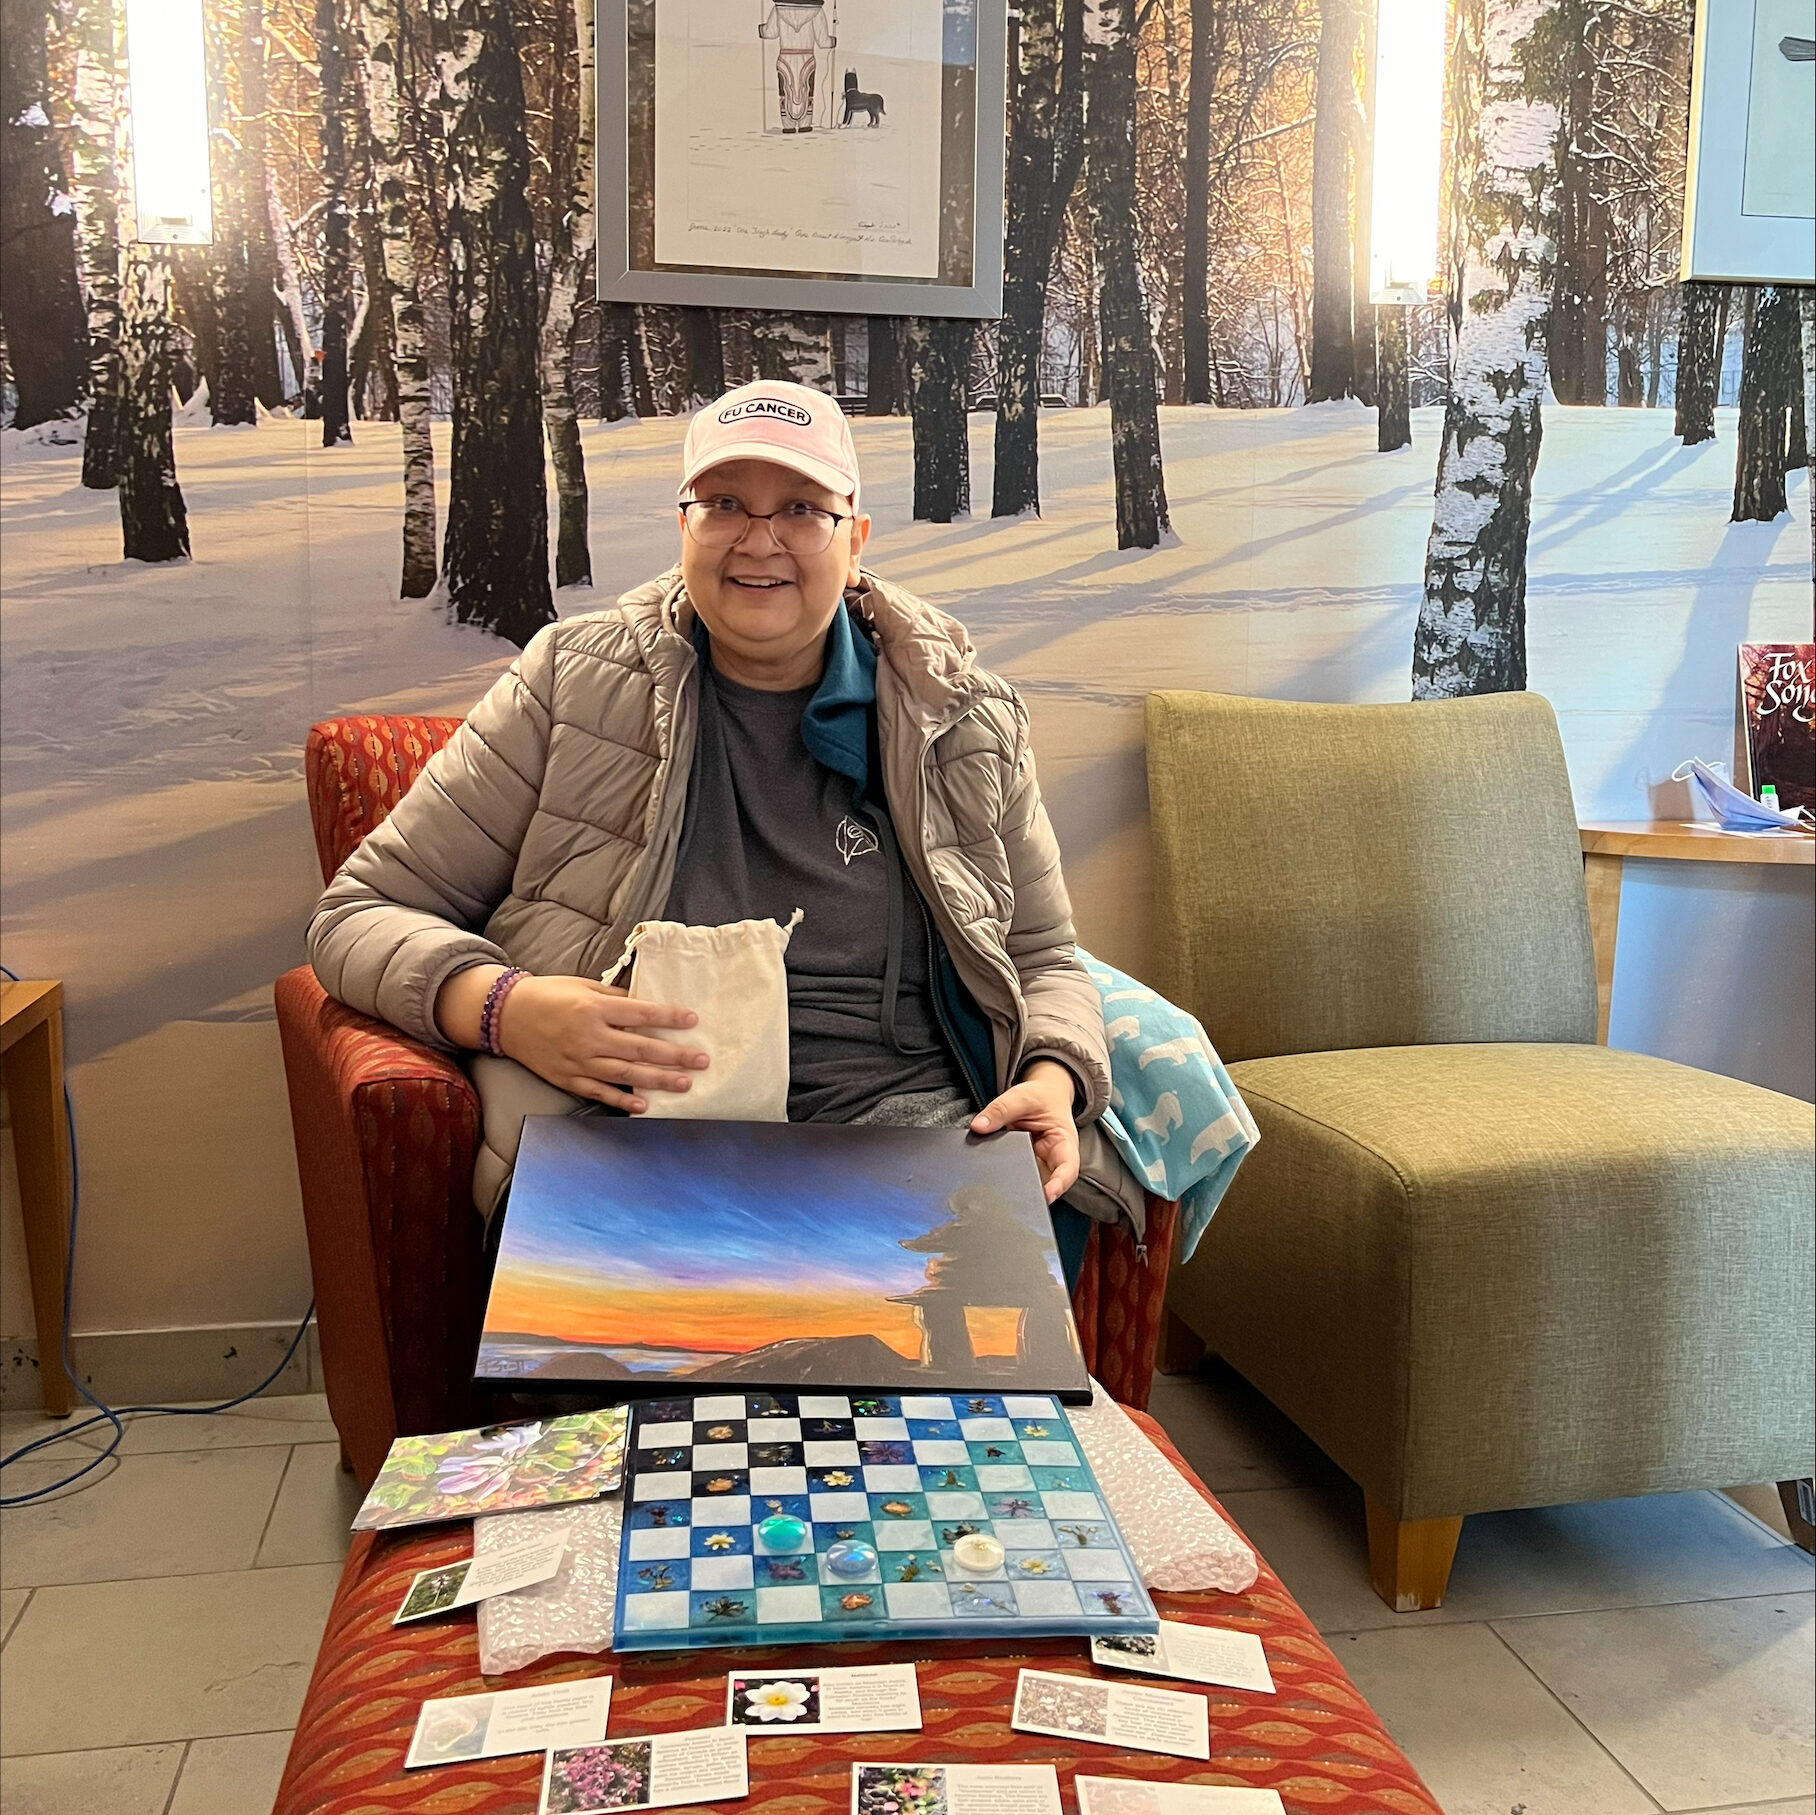 Photo of Jennifer Burmingham, a cancer patient, smiling and sitting in a chair while holding a painting and small bag, with a resin-cast checkerboard set and small cards on an ottoman in front of her.